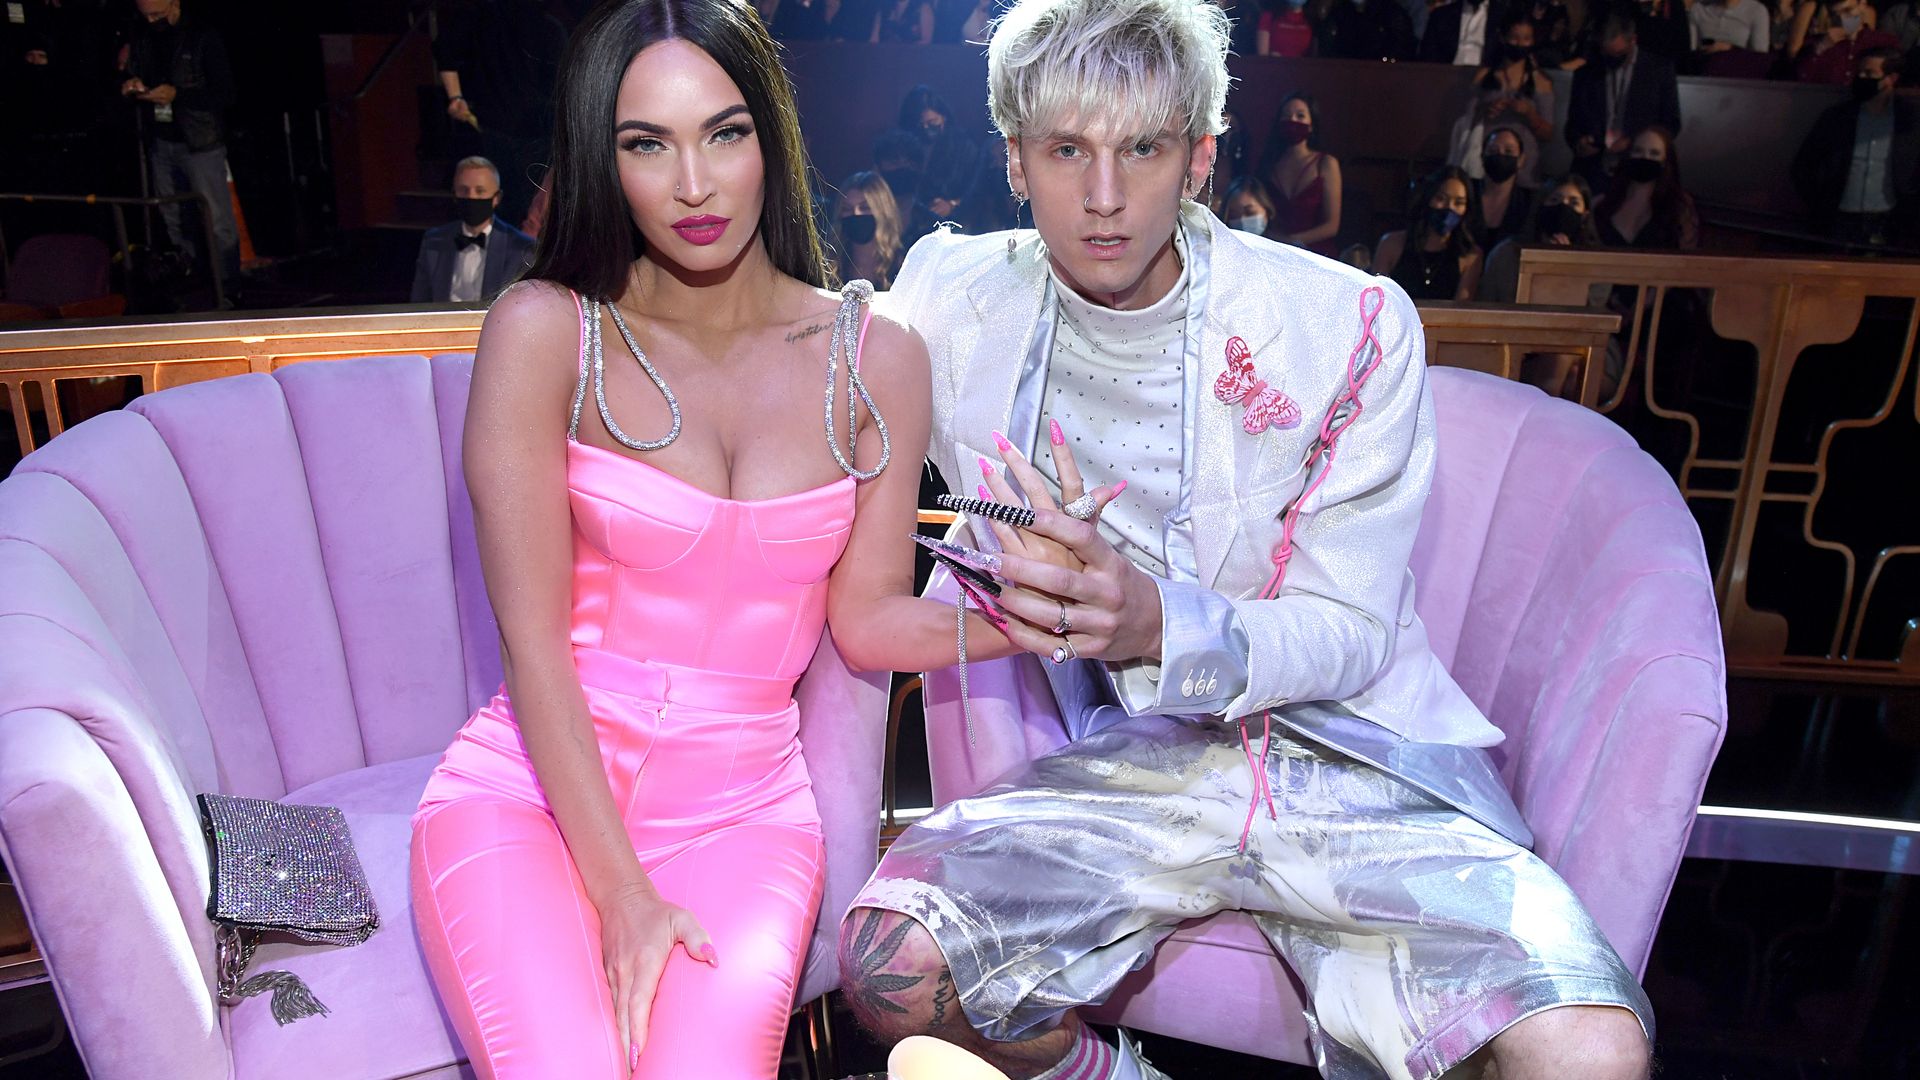 LOS ANGELES, CALIFORNIA - MAY 27: (EDITORIAL USE ONLY) (L-R) Megan Fox and Machine Gun Kelly attend the 2021 iHeartRadio Music Awards at The Dolby Theatre in Los Angeles, California, which was broadcast live on FOX on May 27, 2021. (Photo by Kevin Mazur/Getty Images for iHeartMedia)